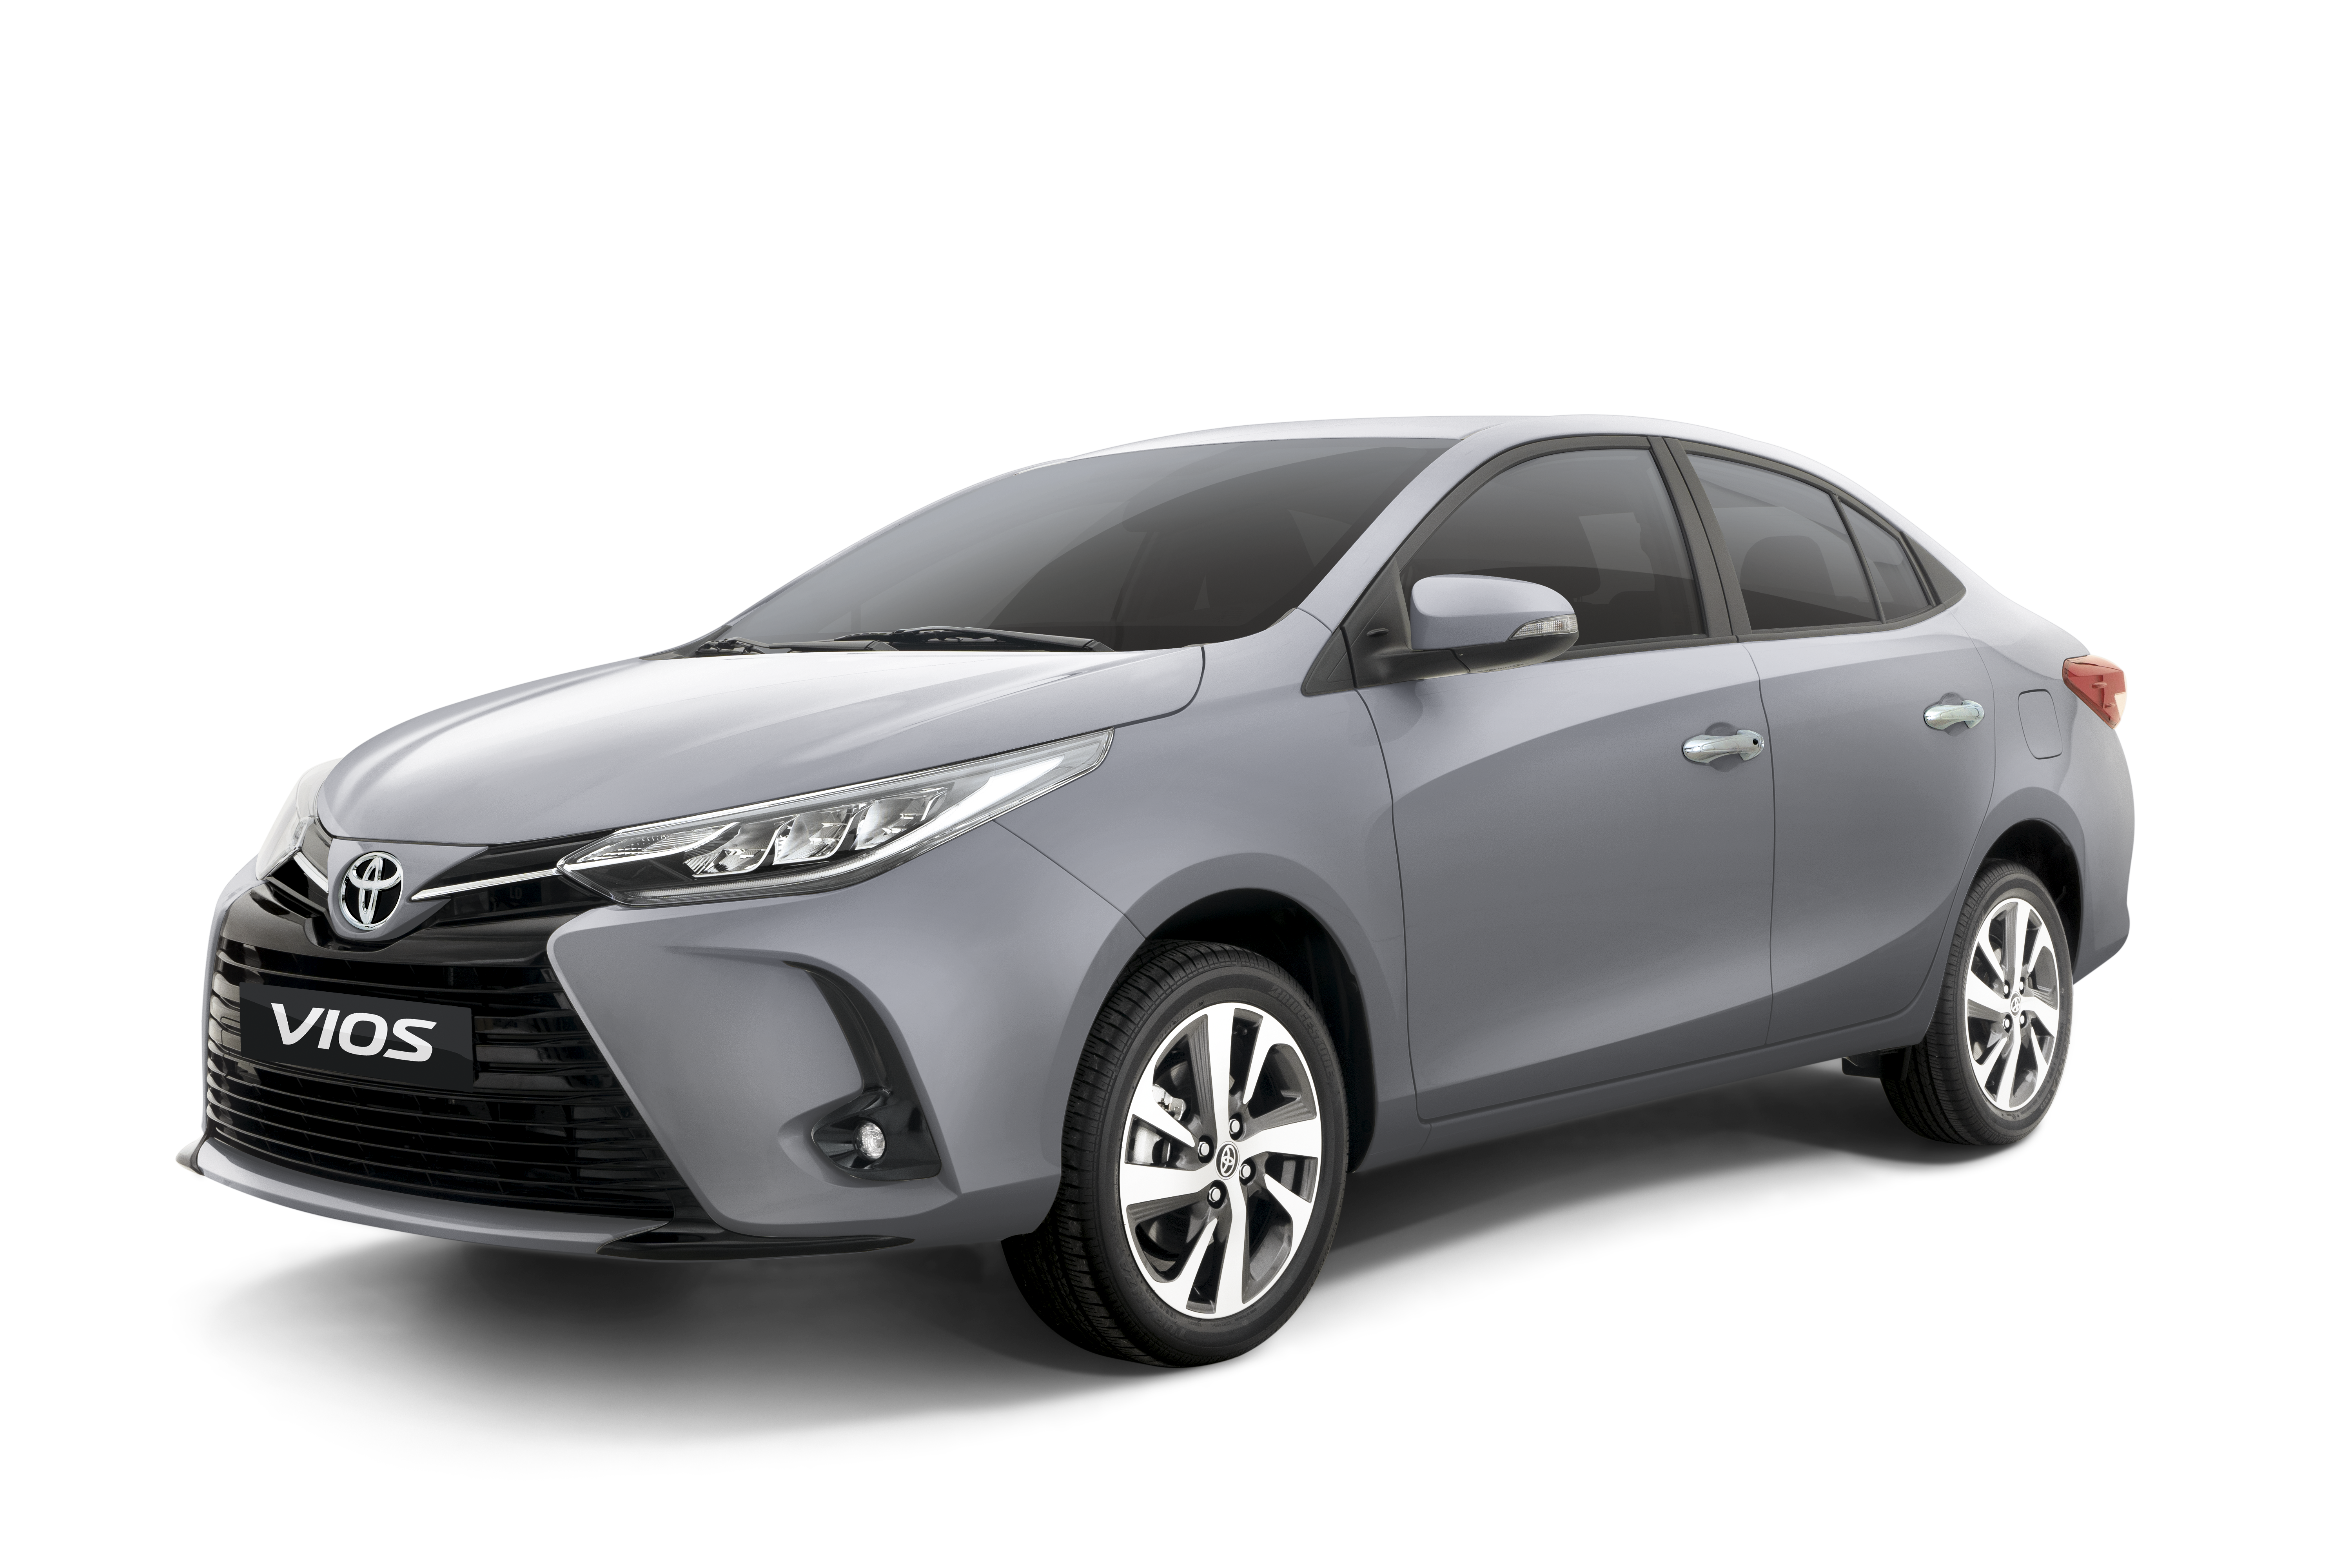 New Vios, New driving experience